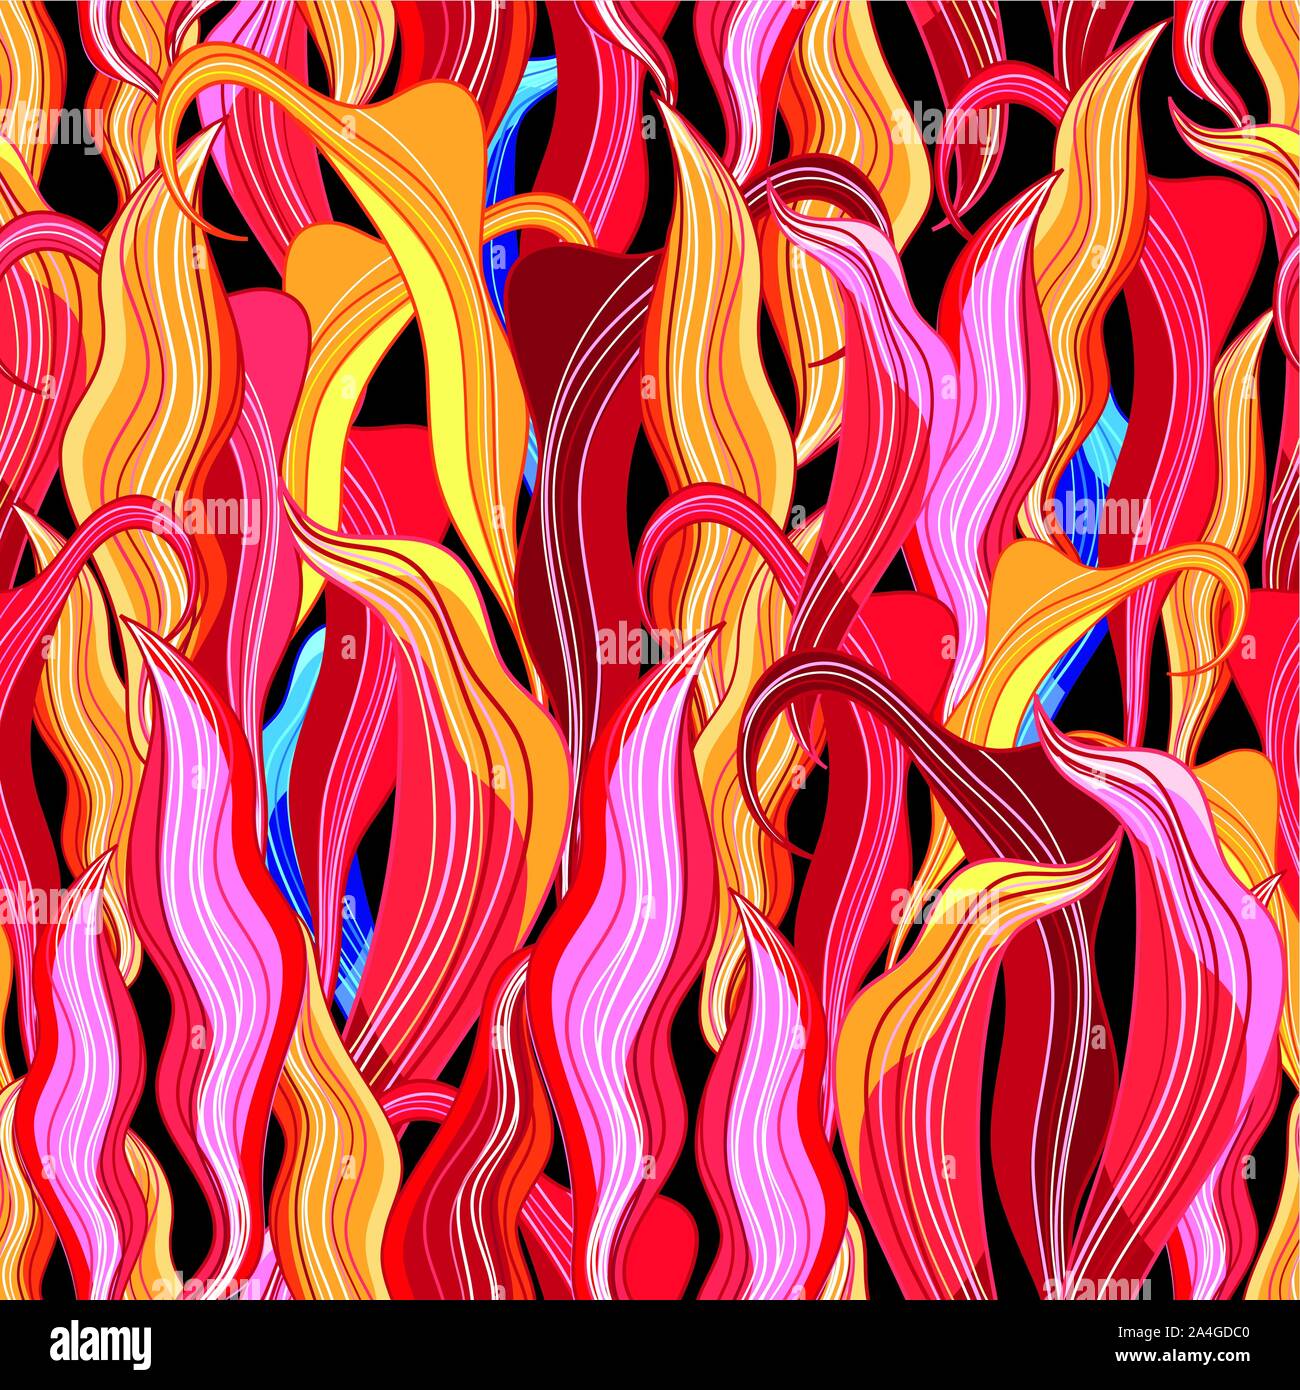 Seamless beautiful fiery multi-colored floral pattern. Design template for wallpaper or fabric. Stock Vector